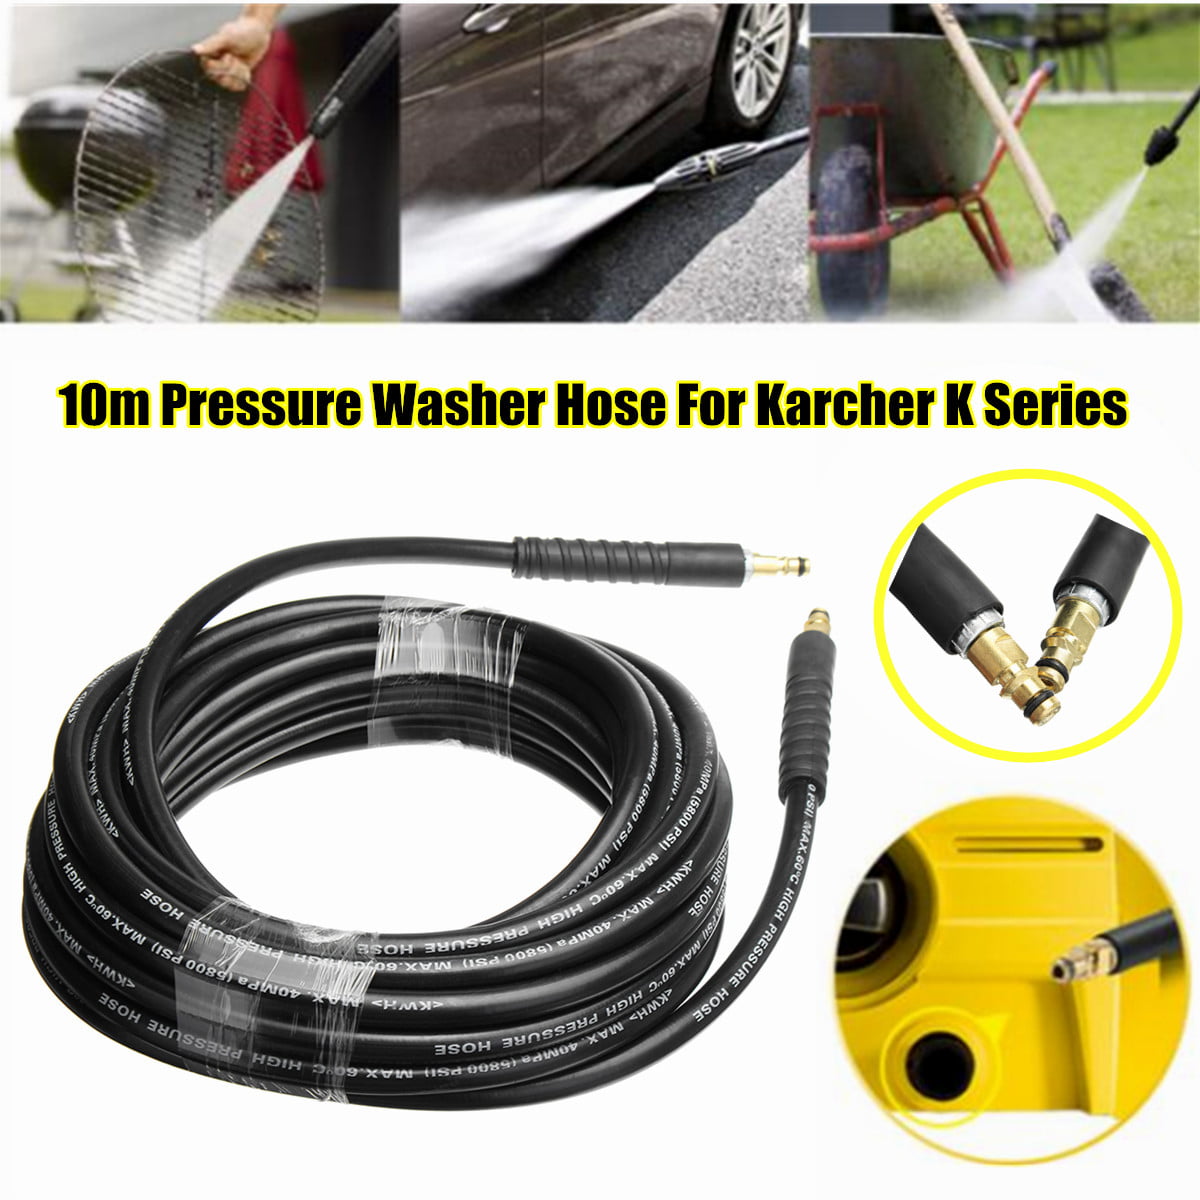 30 Metre Karcher HD 605 Plus Type Pressure Washer Replacement Hose Thirty 30M M 